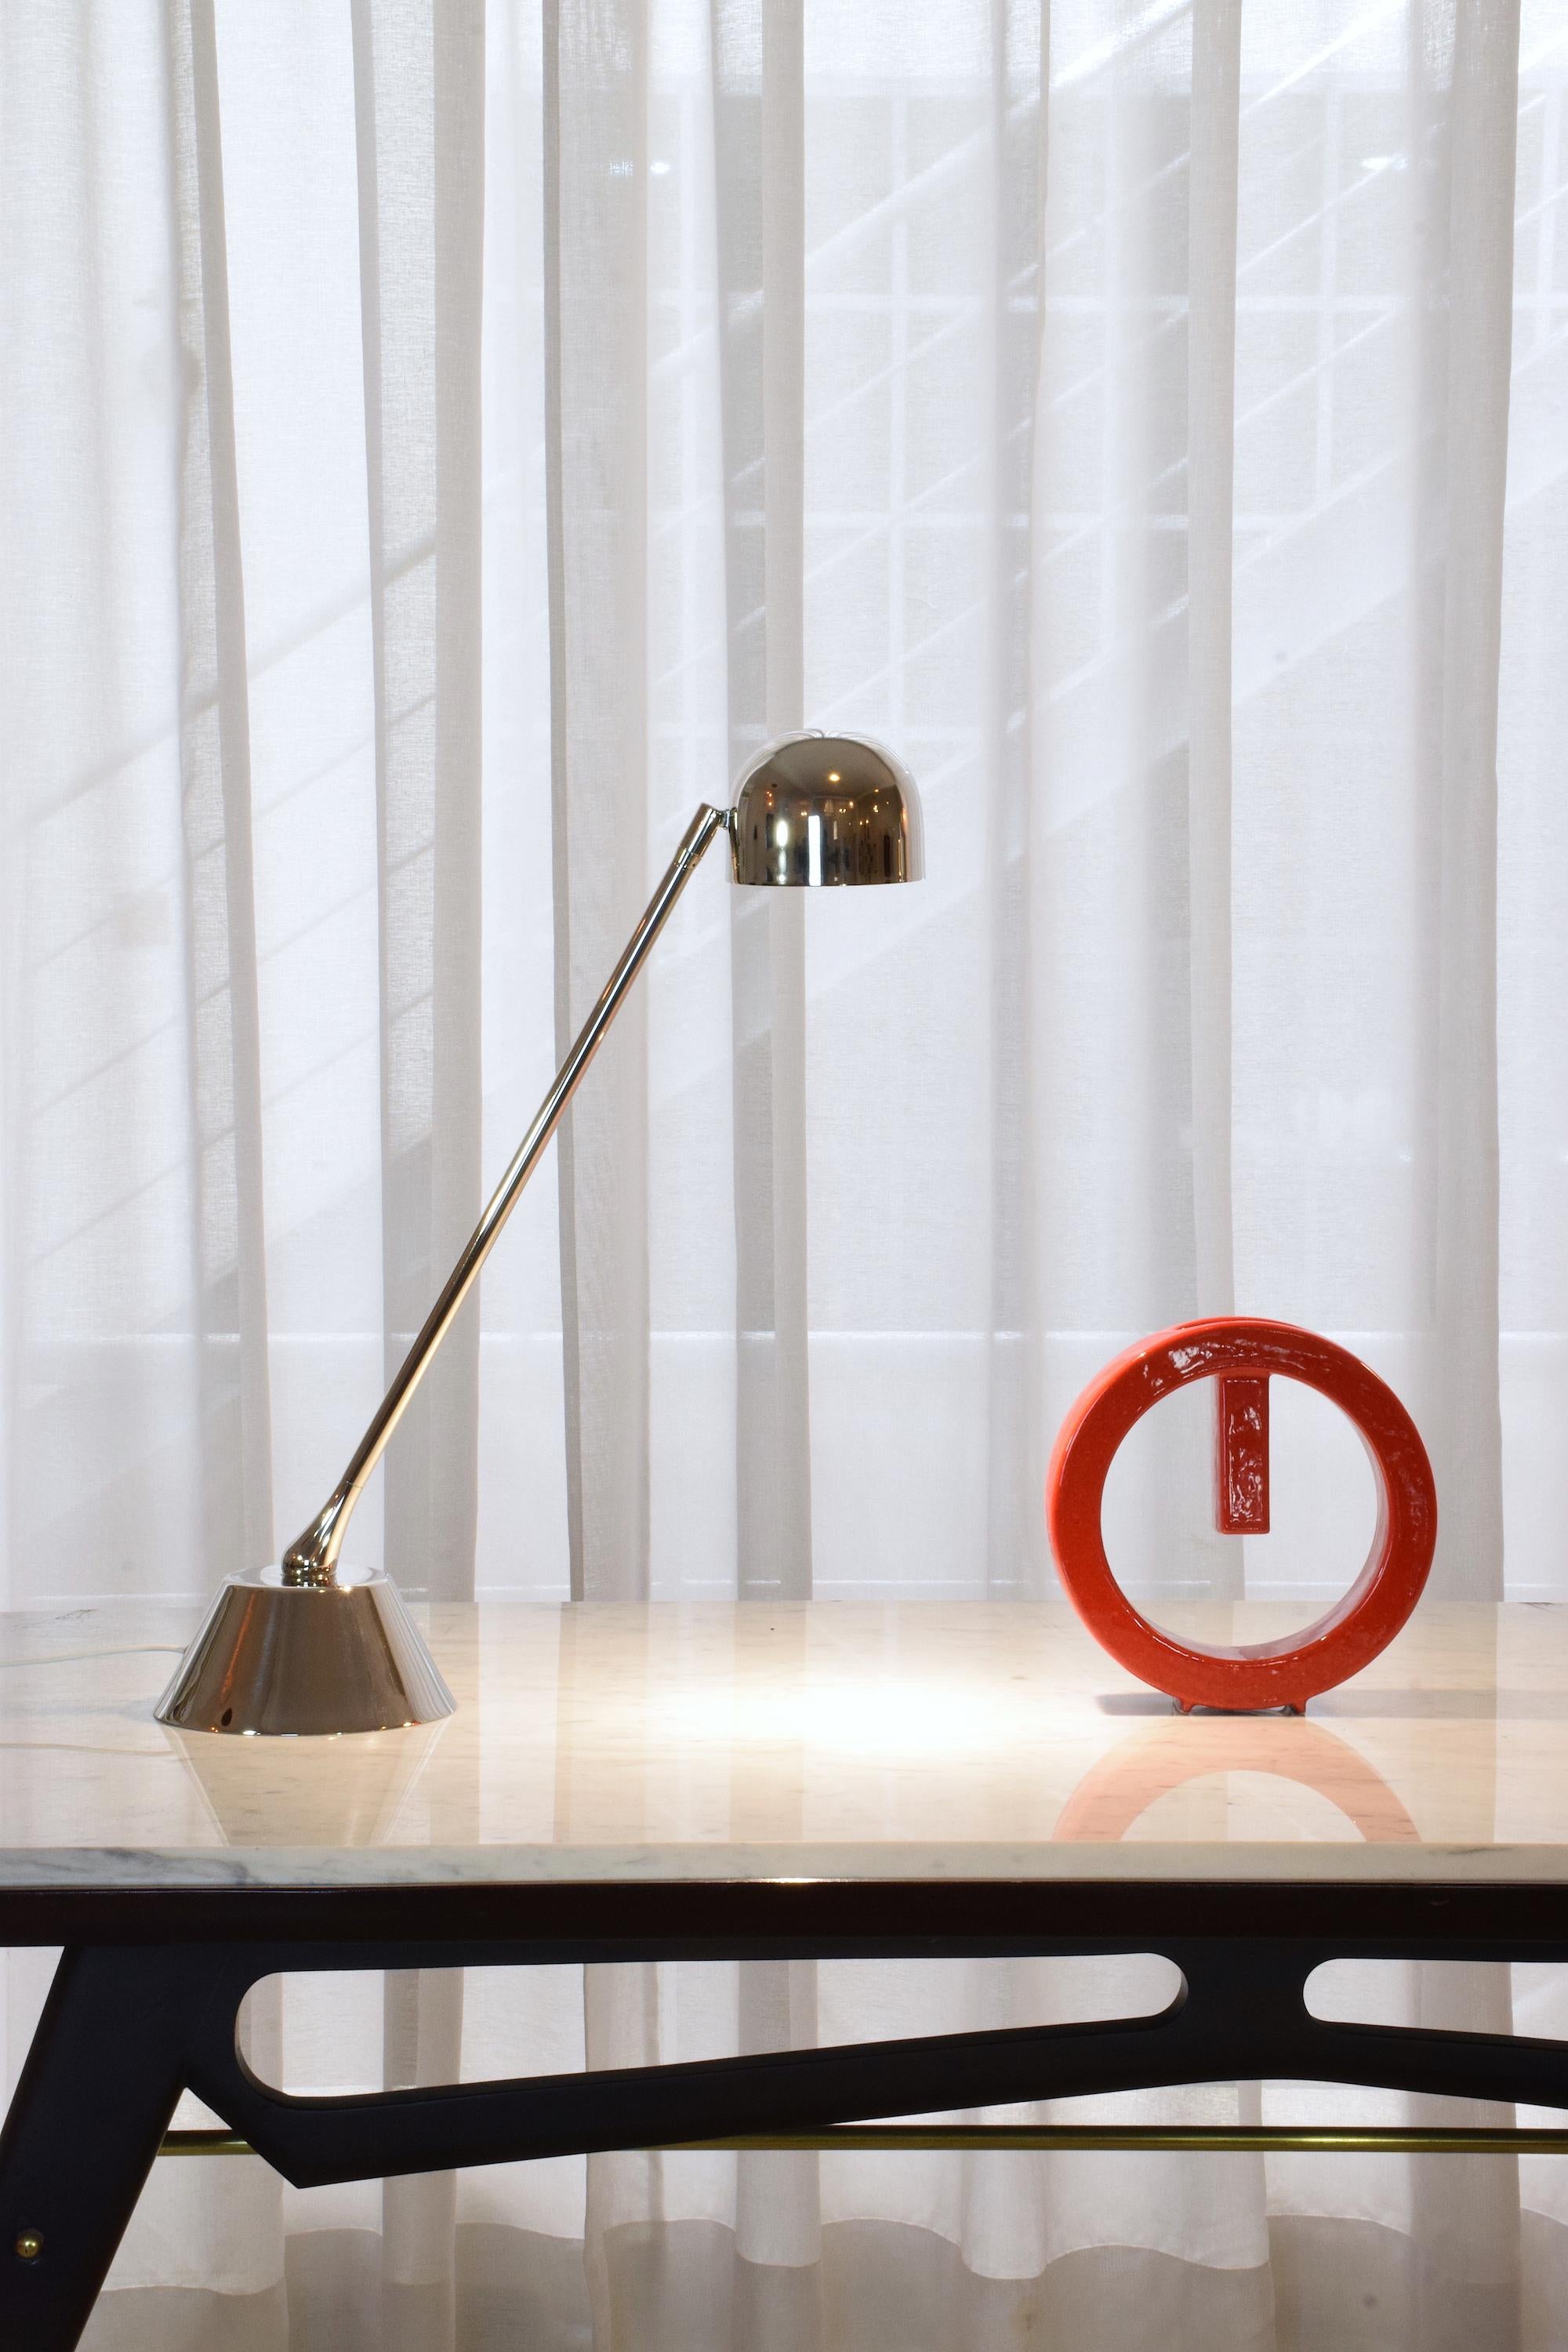 The D.Light T1 is a statement desk lamp designed and handcrafted in solid nickel-plated brass with a directional tubular stand and an adjustable spherical shade.

1 x 60 w Max G9
230 V Led integrated 
130 V Led 

This piece is professionally wired